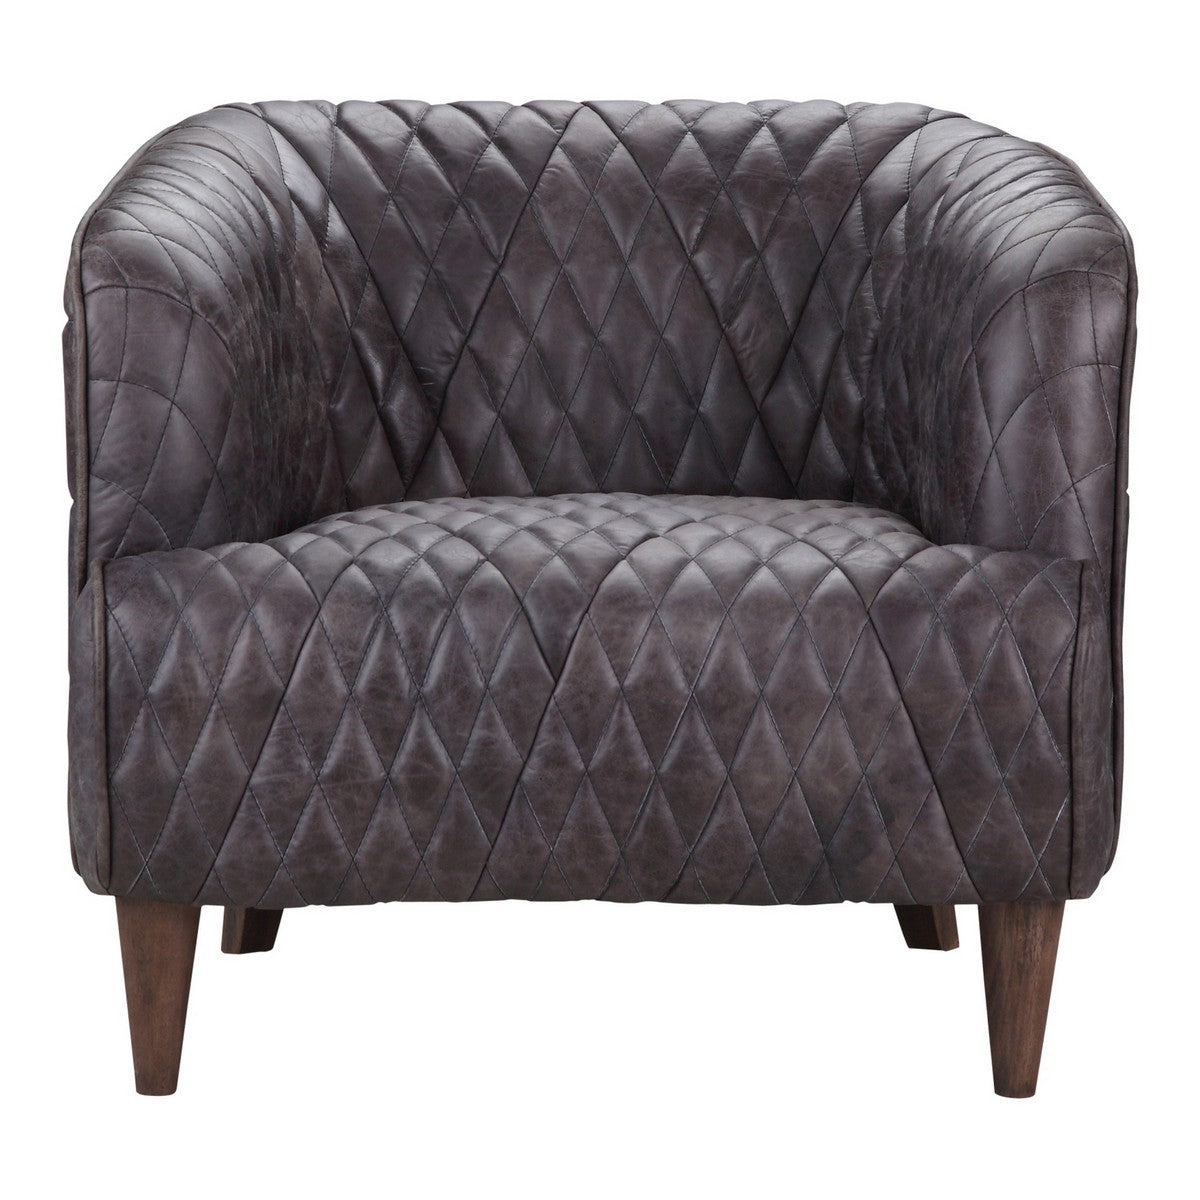 Moe's Home Collection Magdelan Tufted Leather Arm Chair Antique Ebony - PK-1076-47